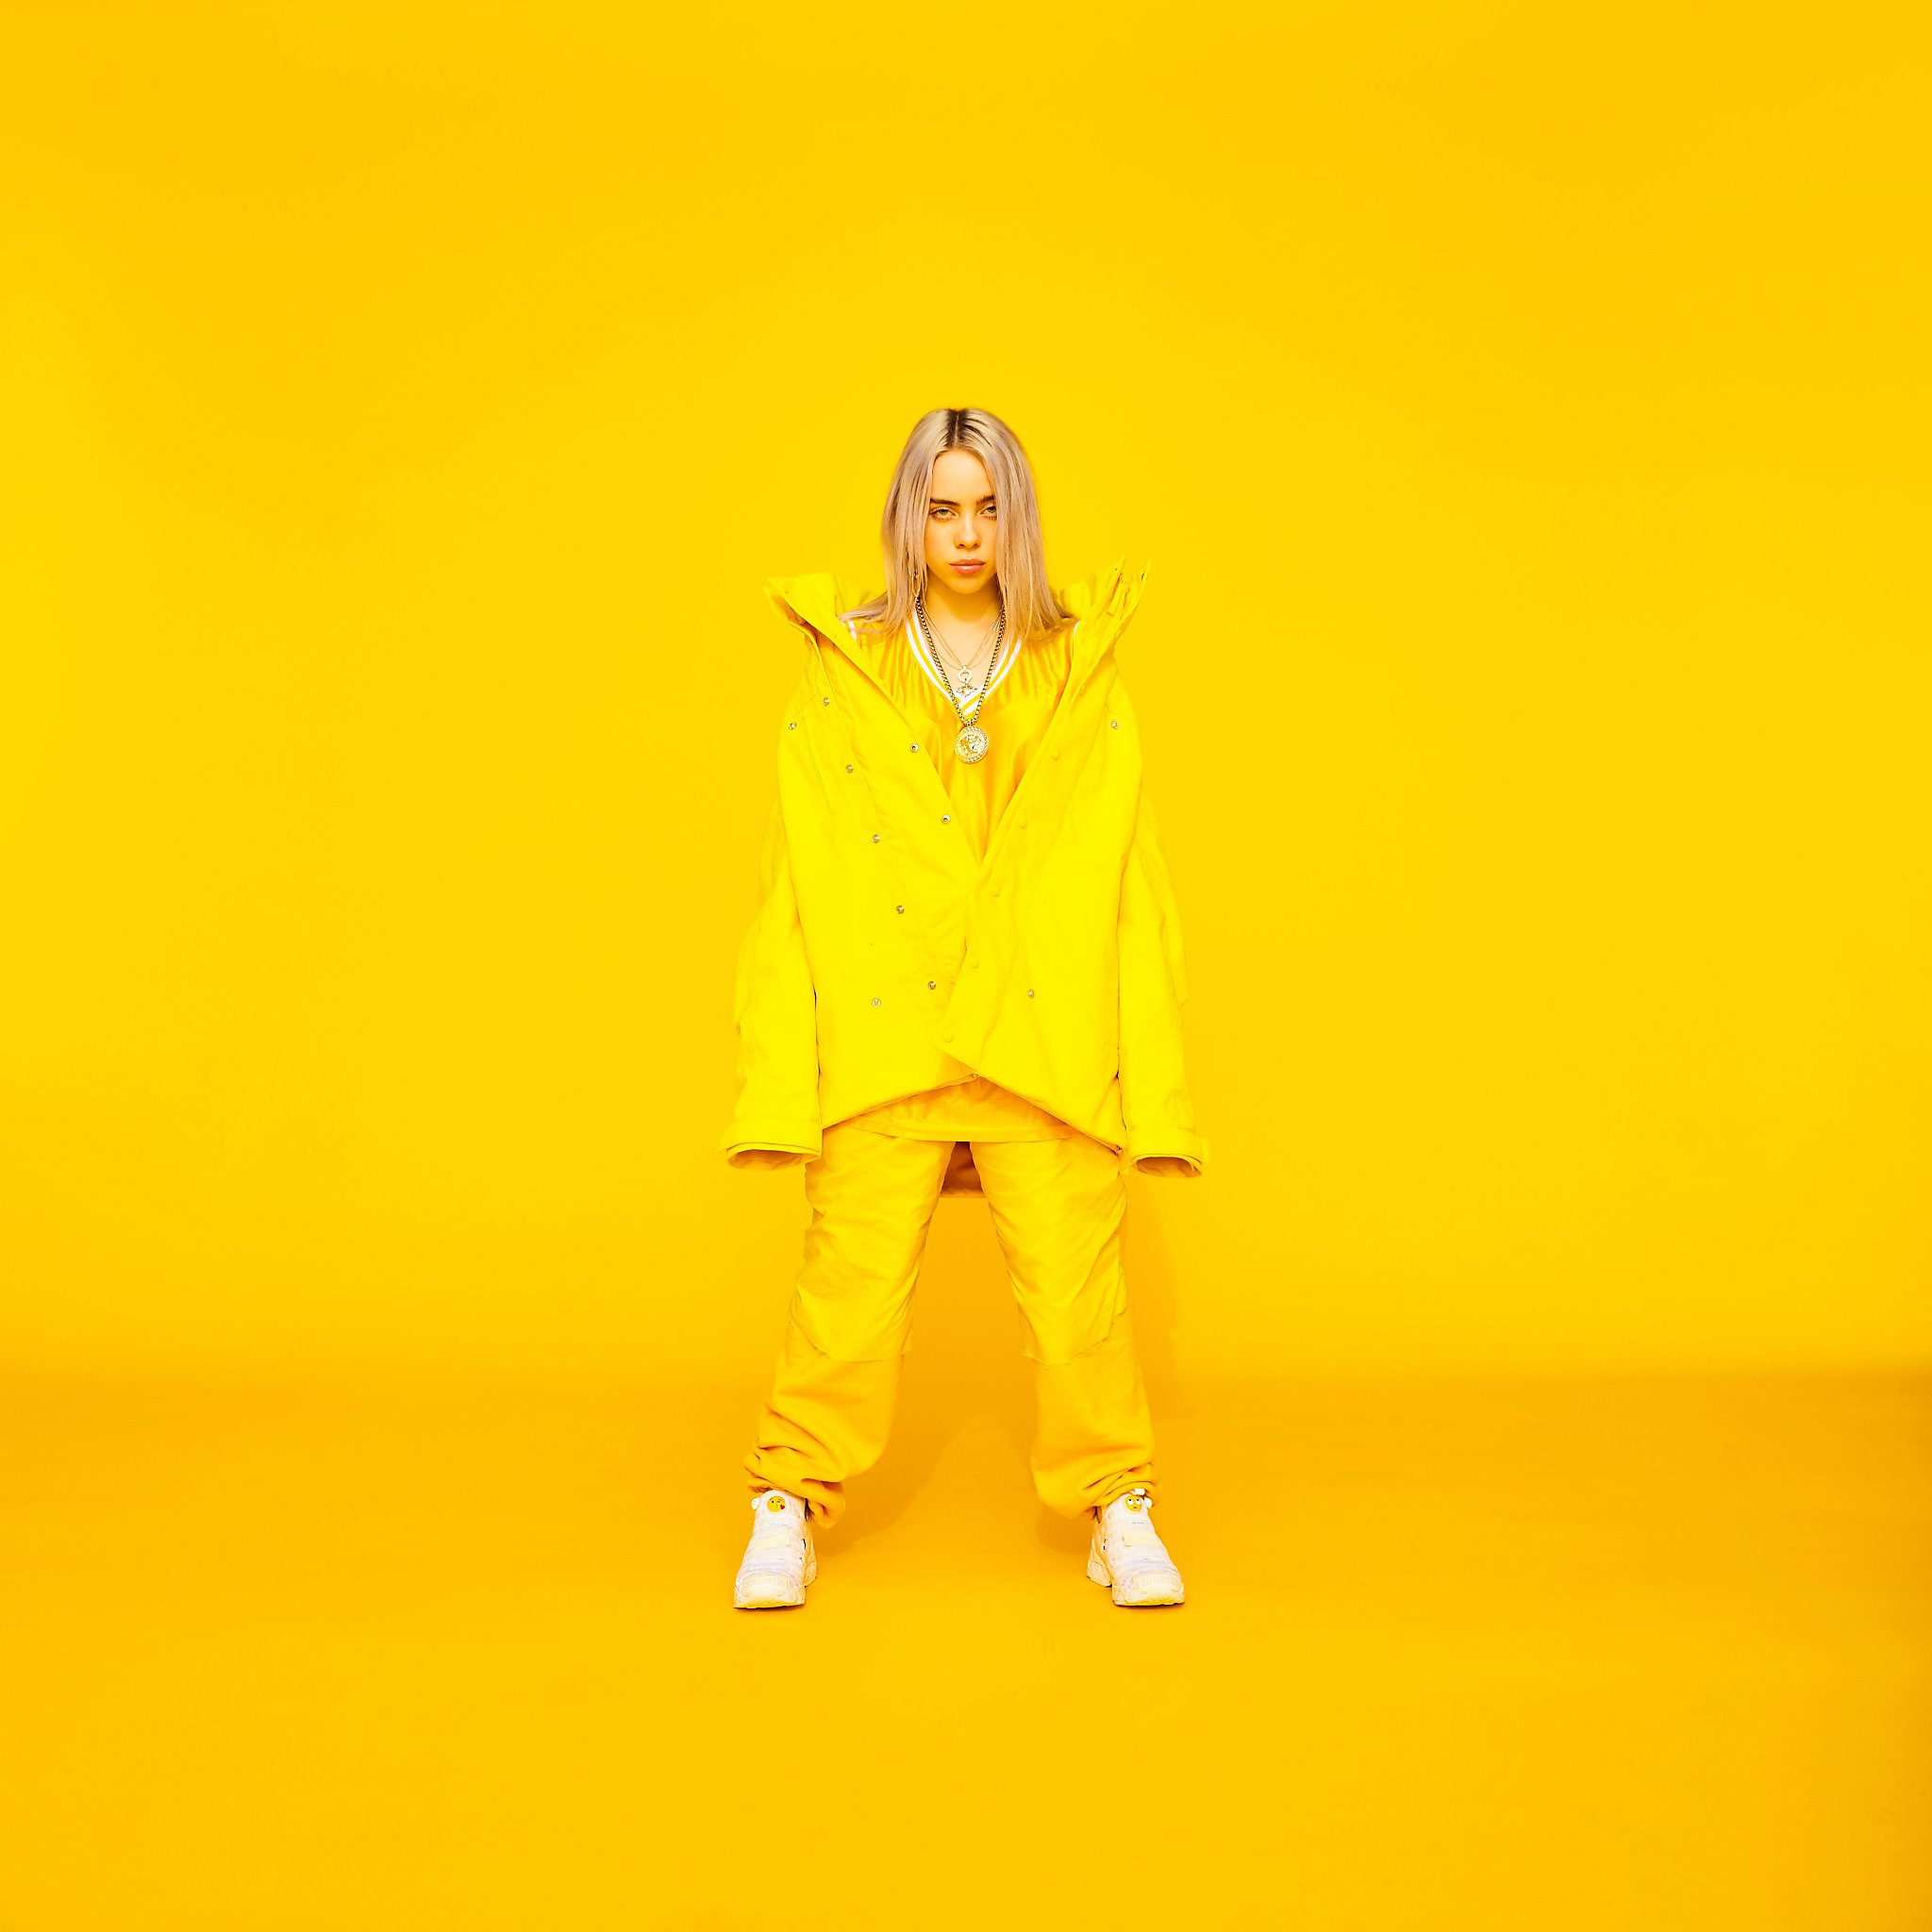 Billie Eilish is the teen pop singer you’ve been waiting for - SFChronicle.com2048 x 2048